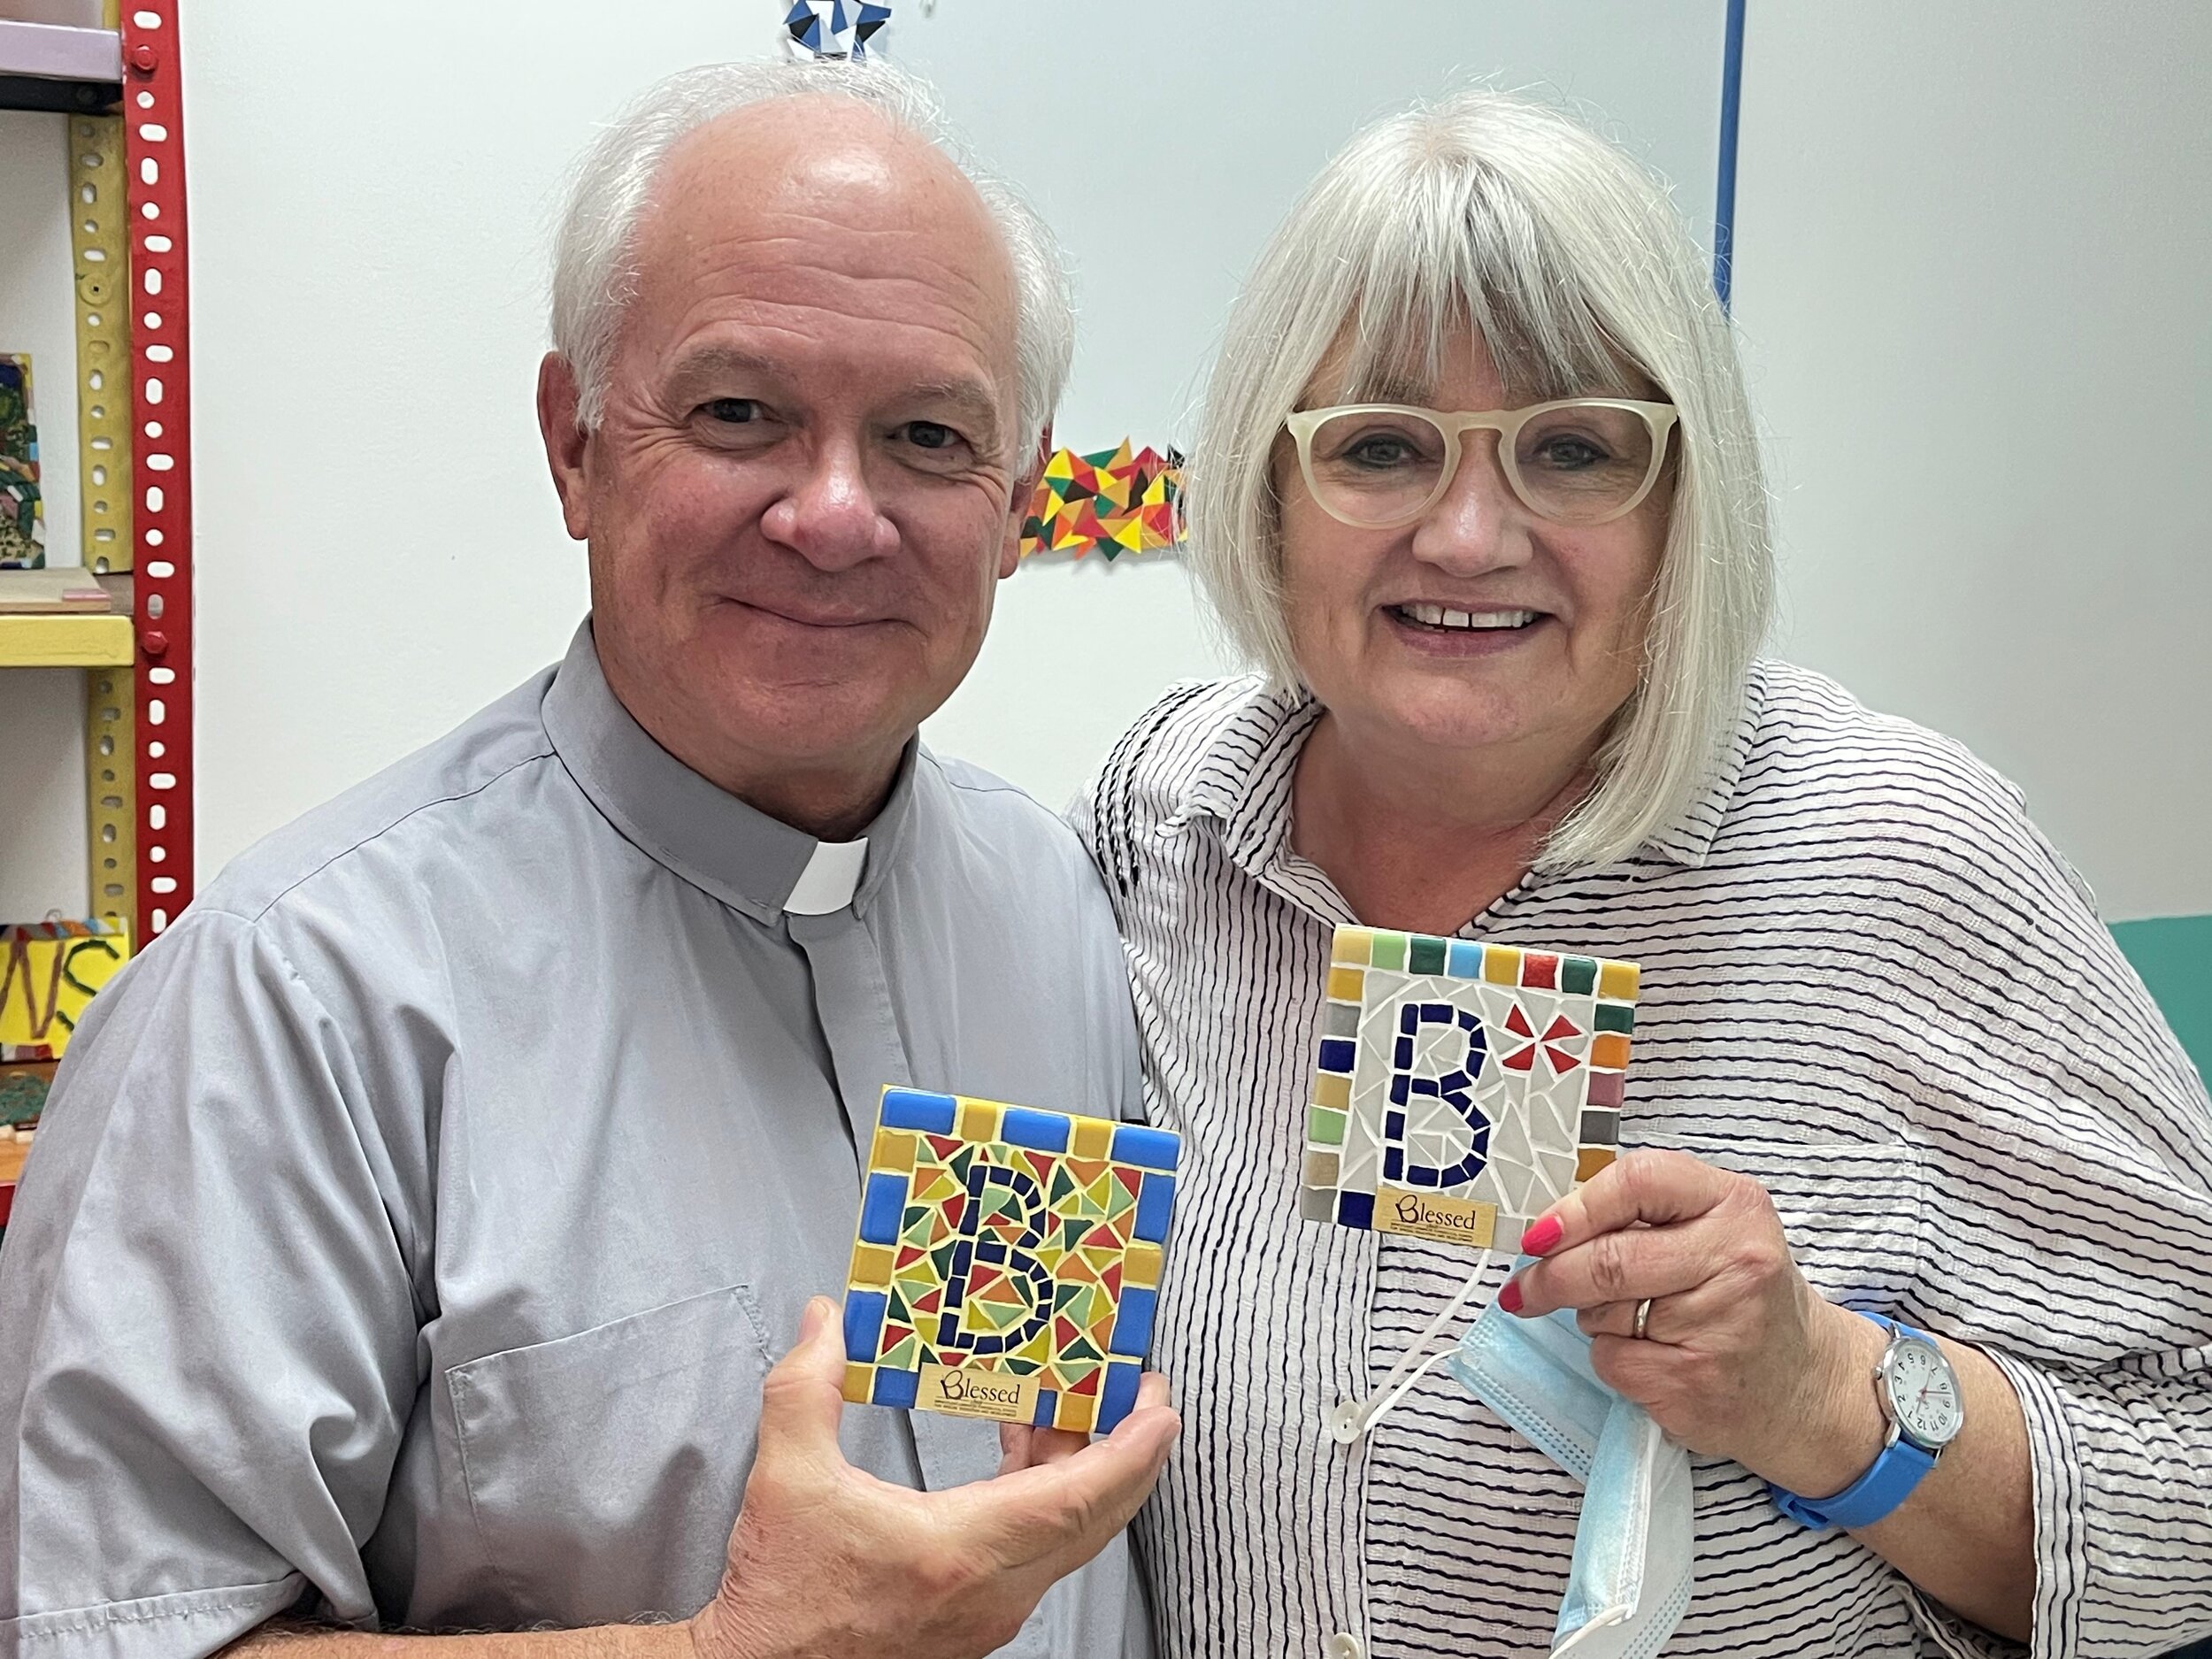  Jack and Marilyn found their initial mosaics made by Blessed students 